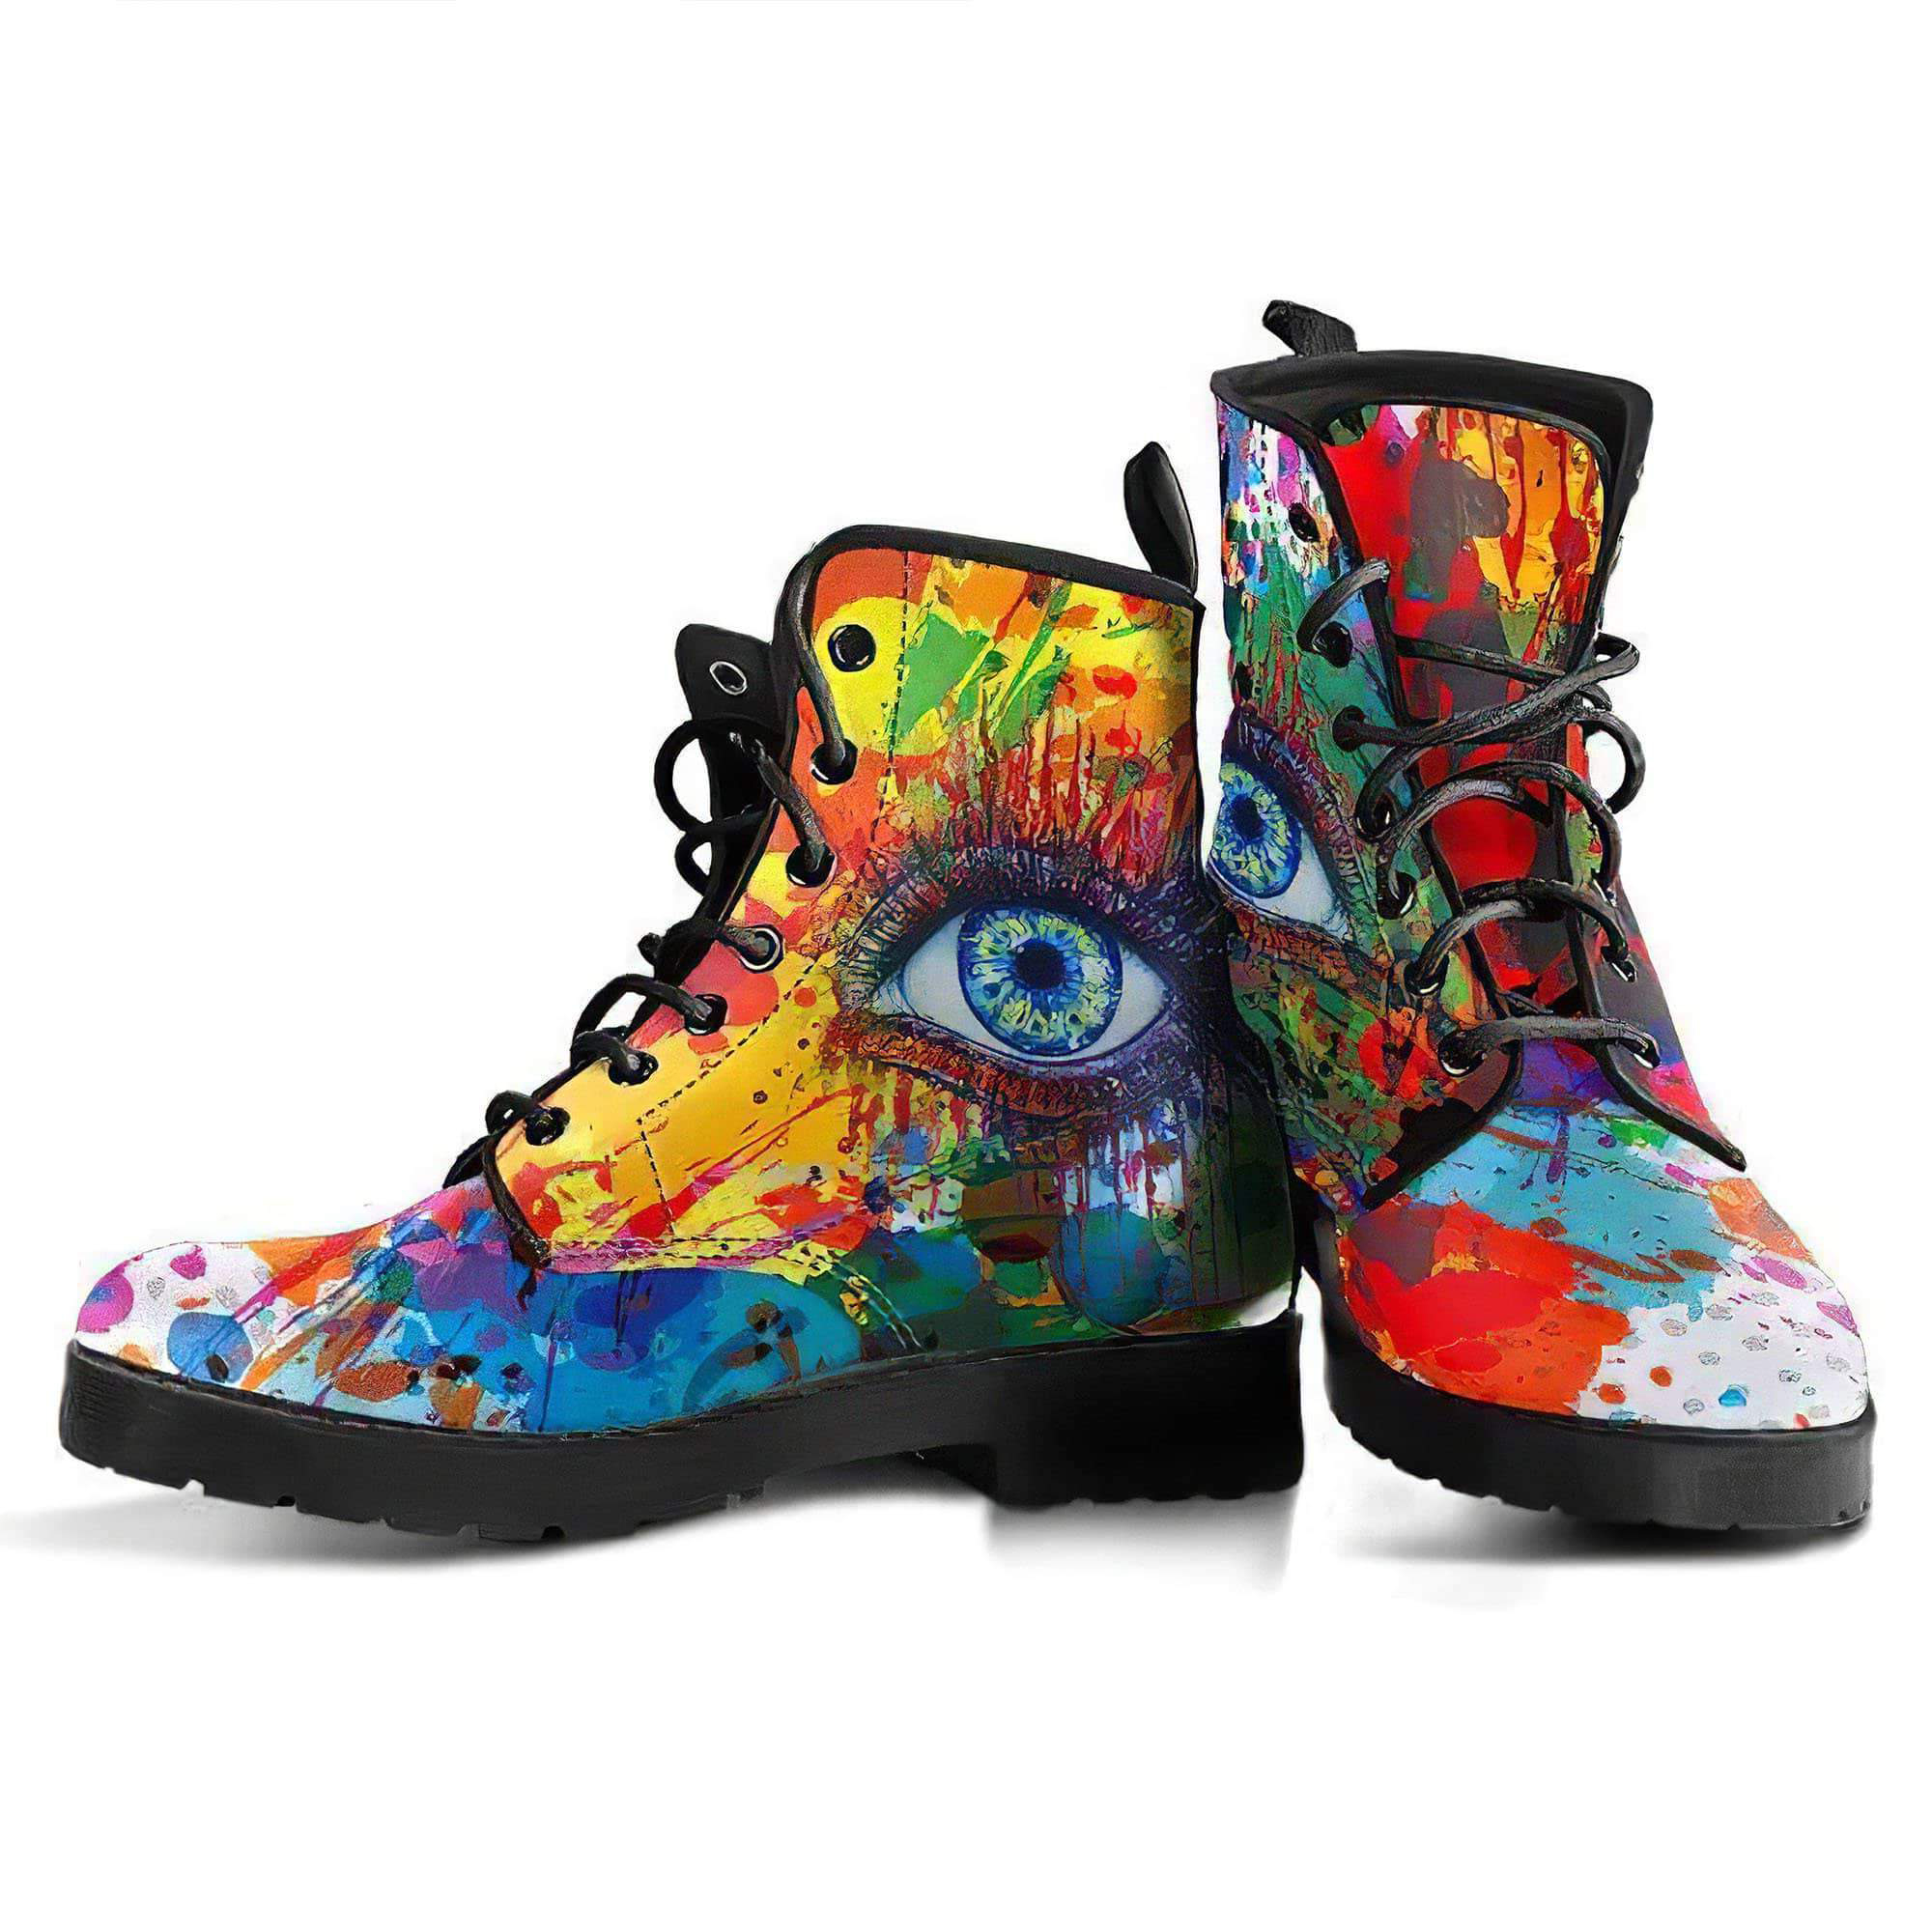 rainbow-eye-handcrafted-boots-women-s-leather-boots-12051941687357.jpg